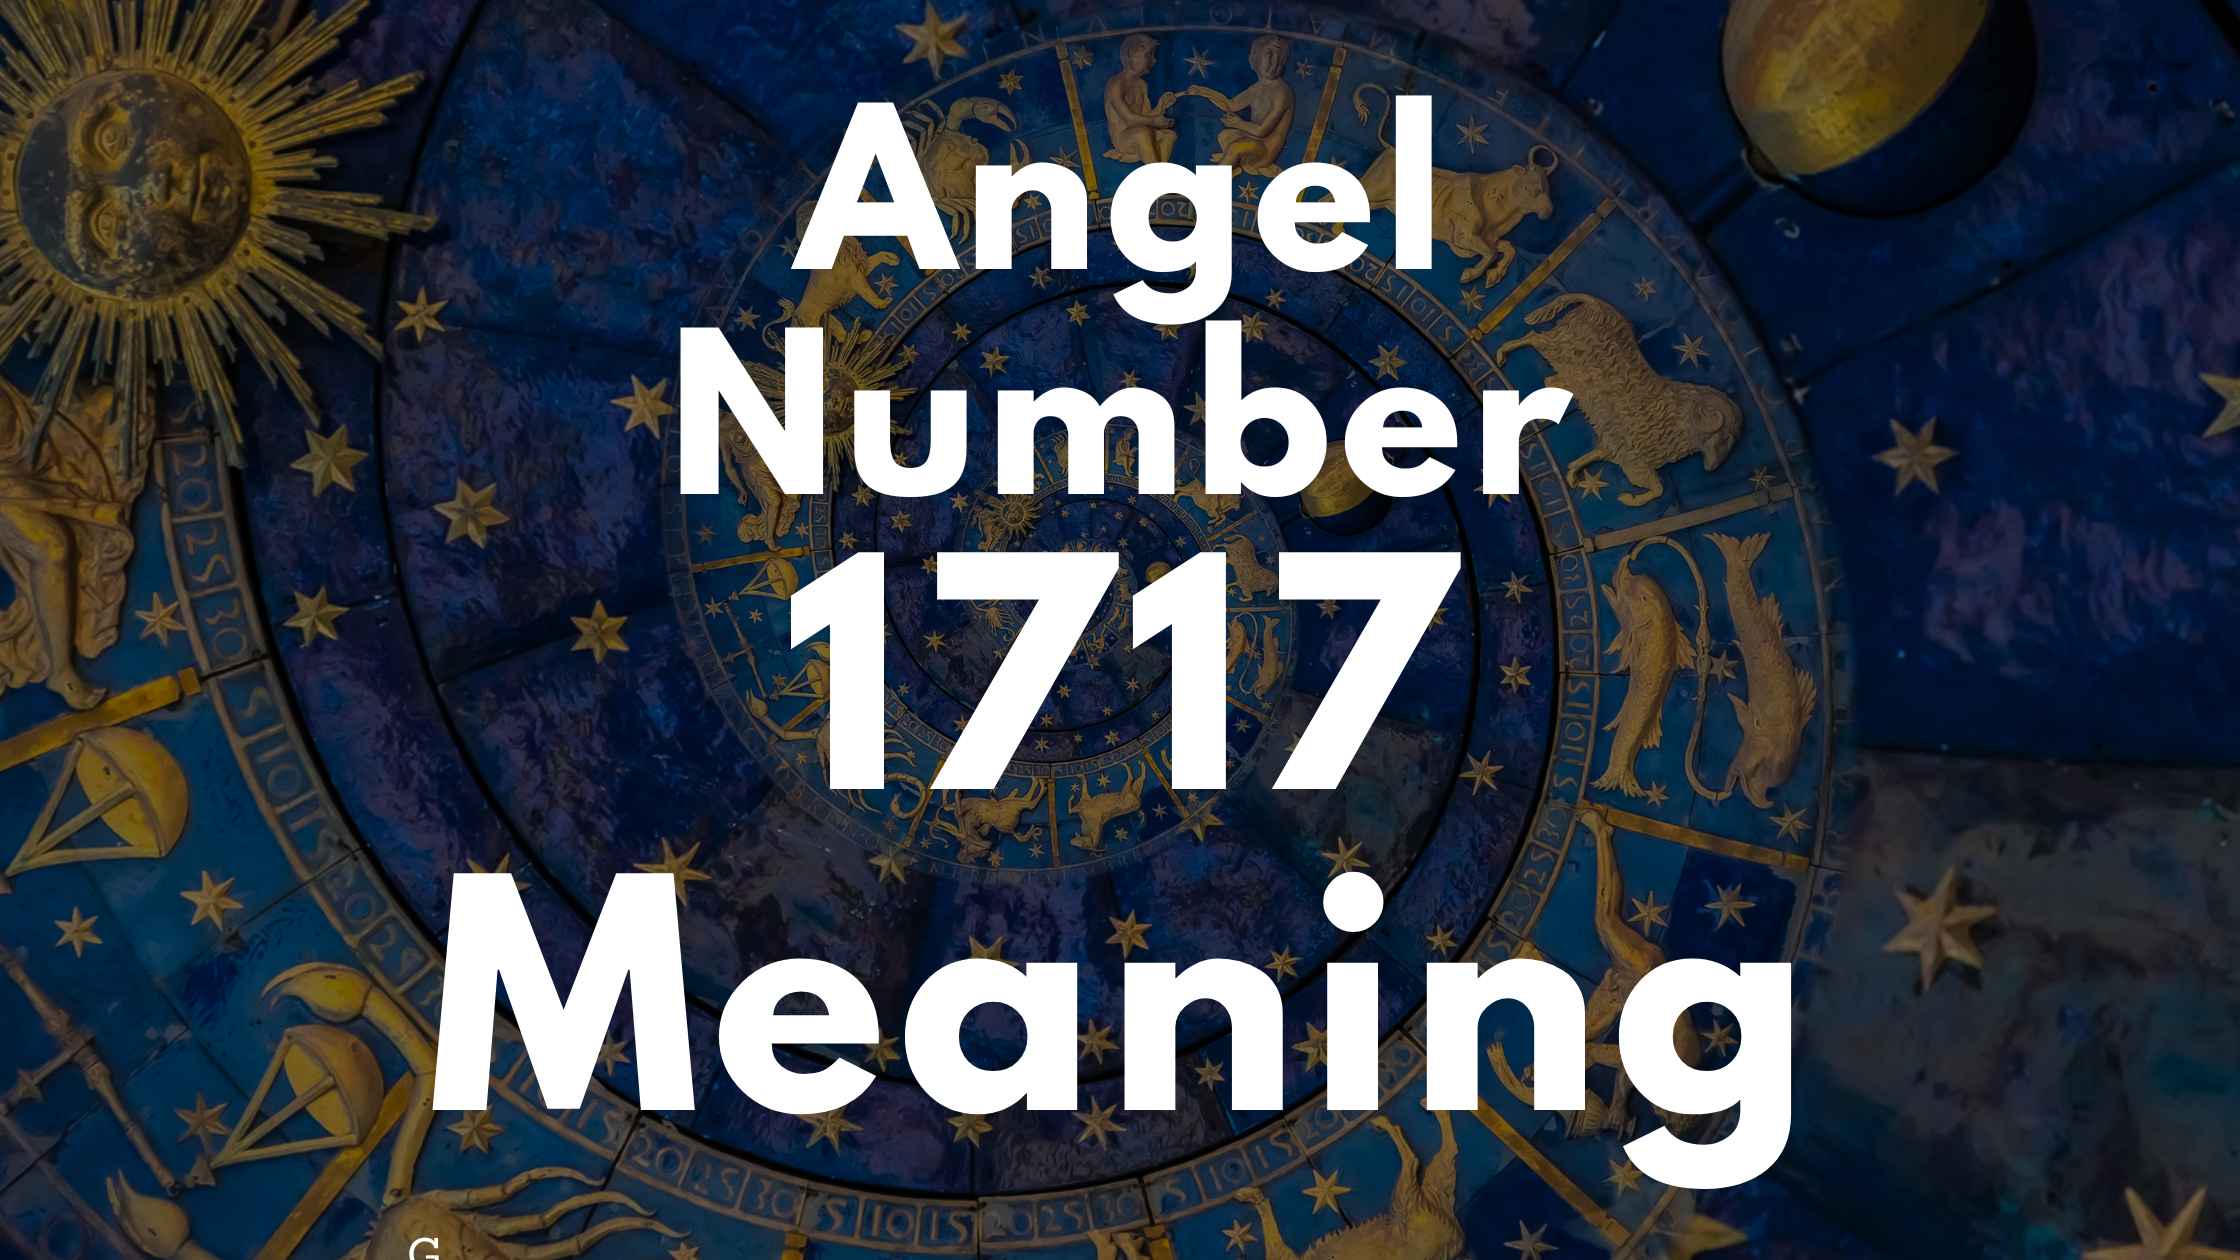 Angel Number 1717 Spiritual Meaning, Symbolism, and Significance